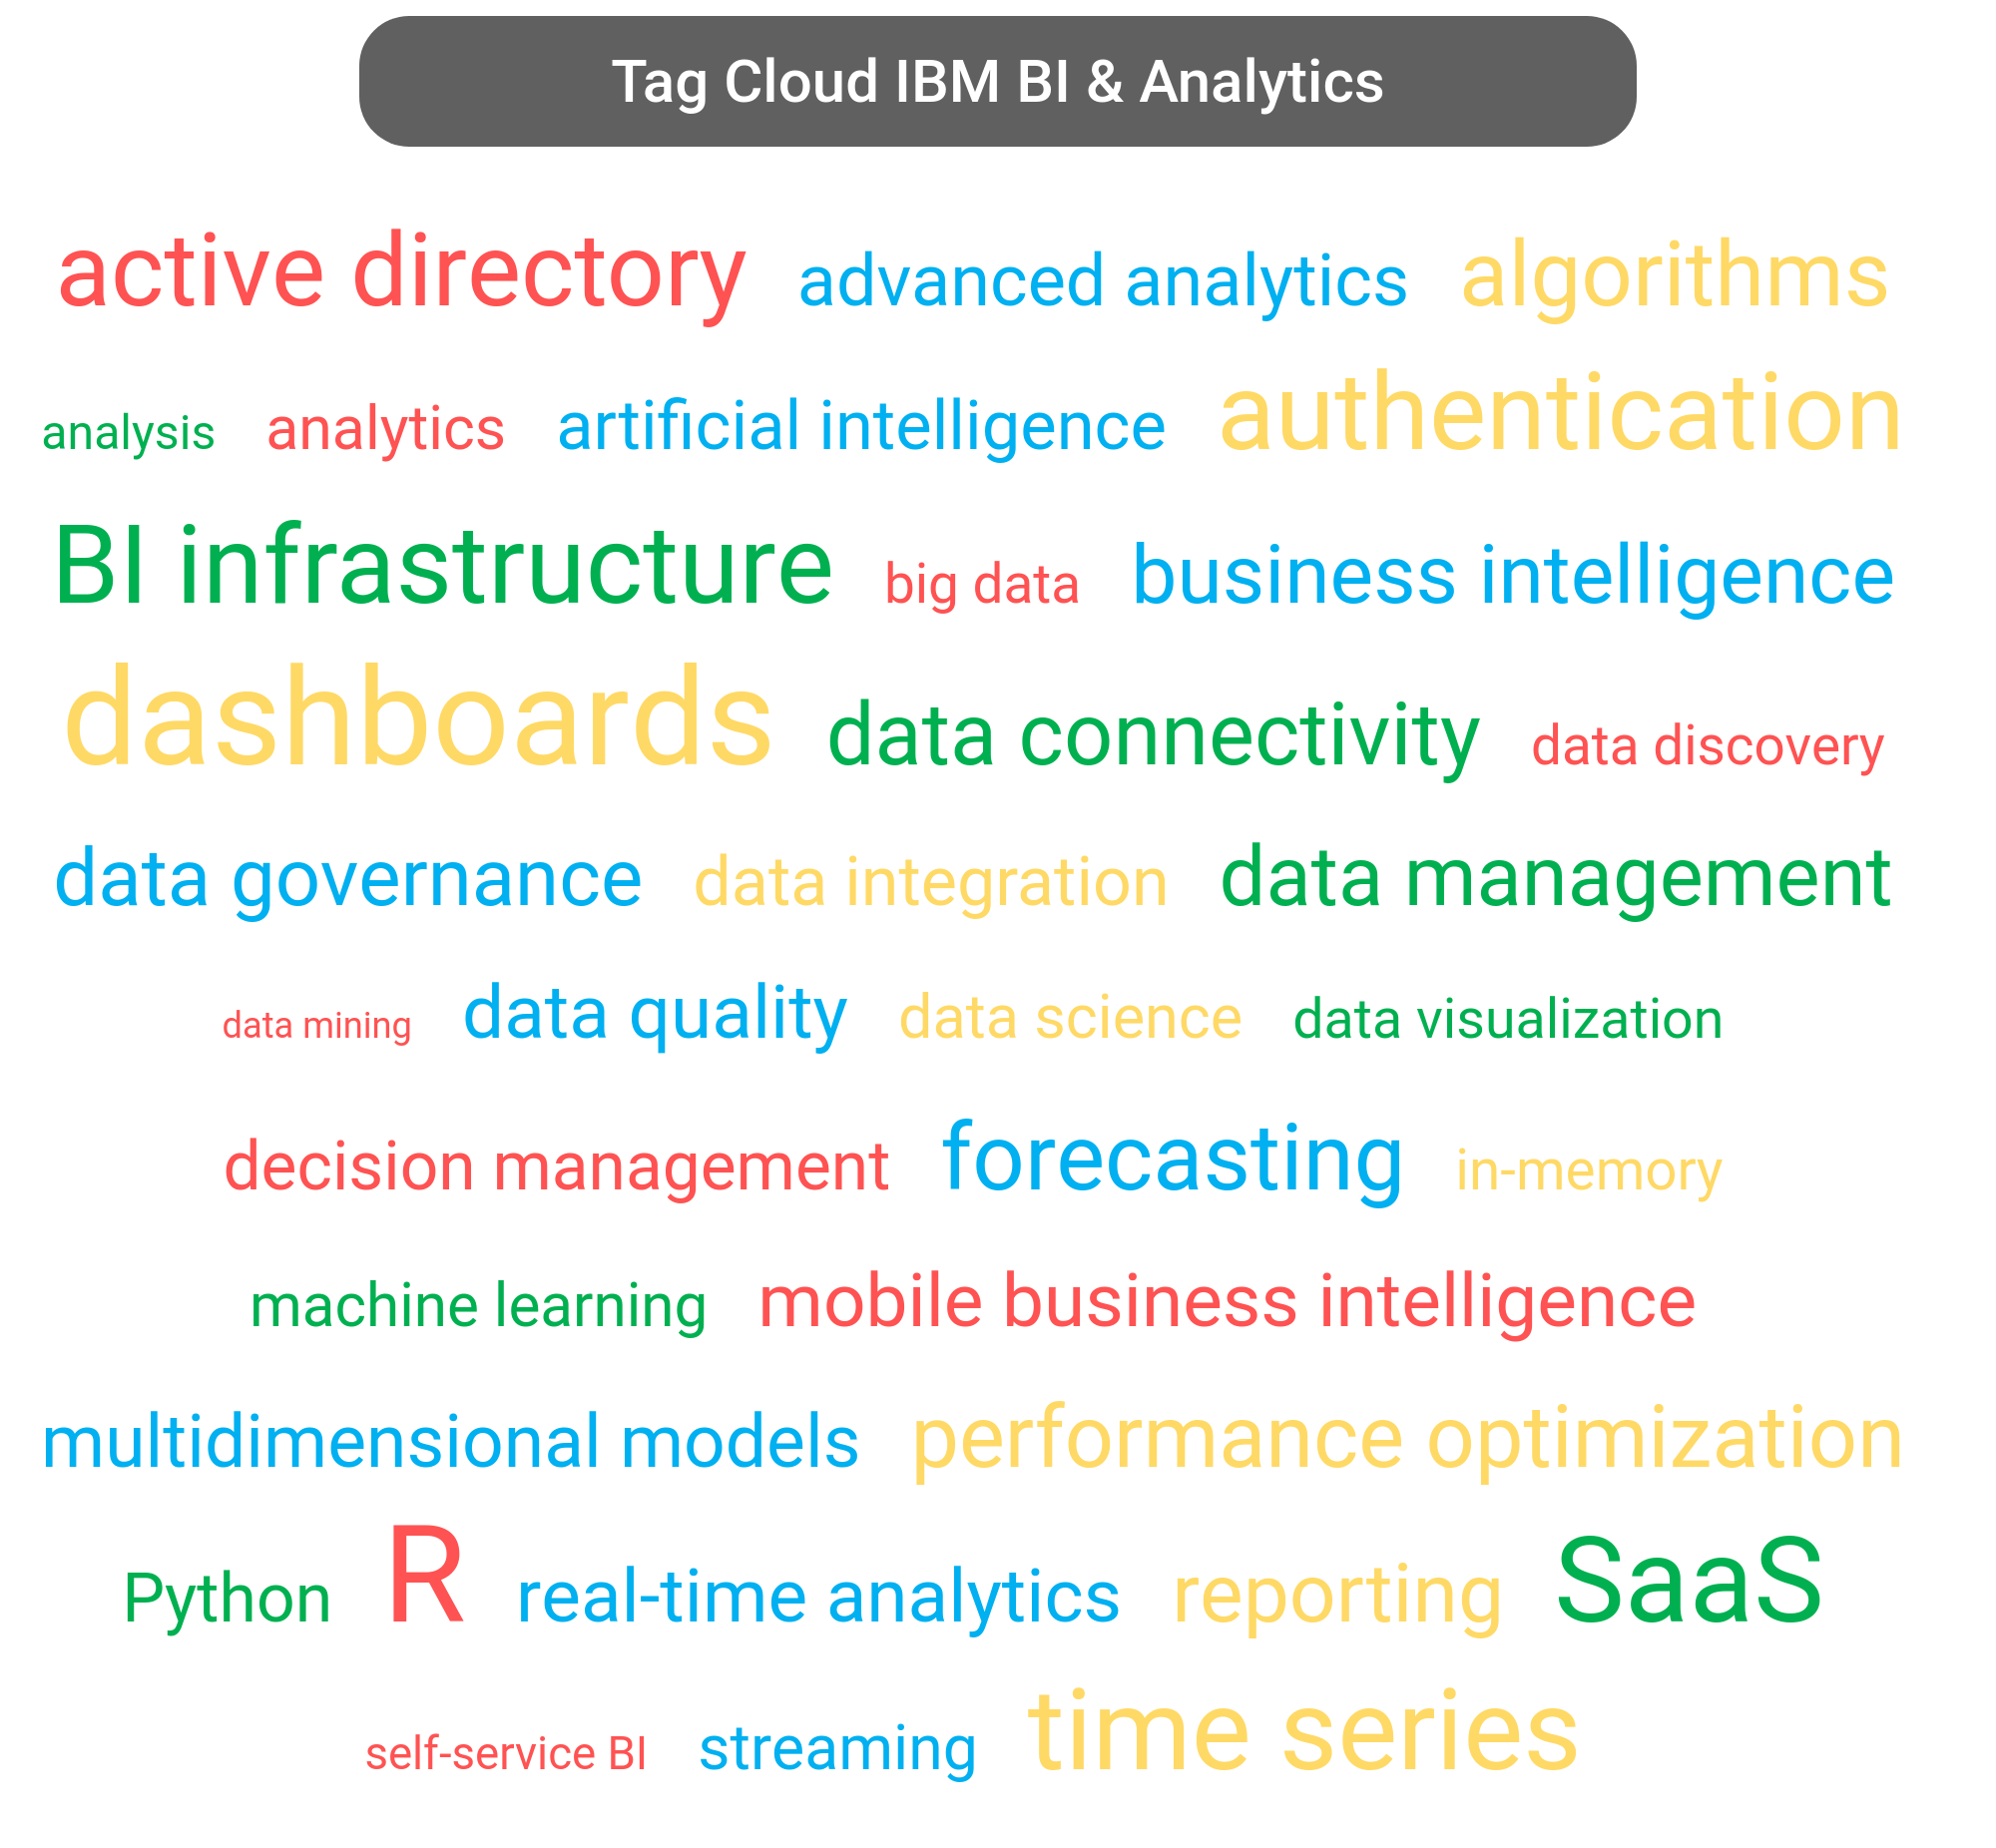 Tag cloud of the IBM Business Analytics tools.